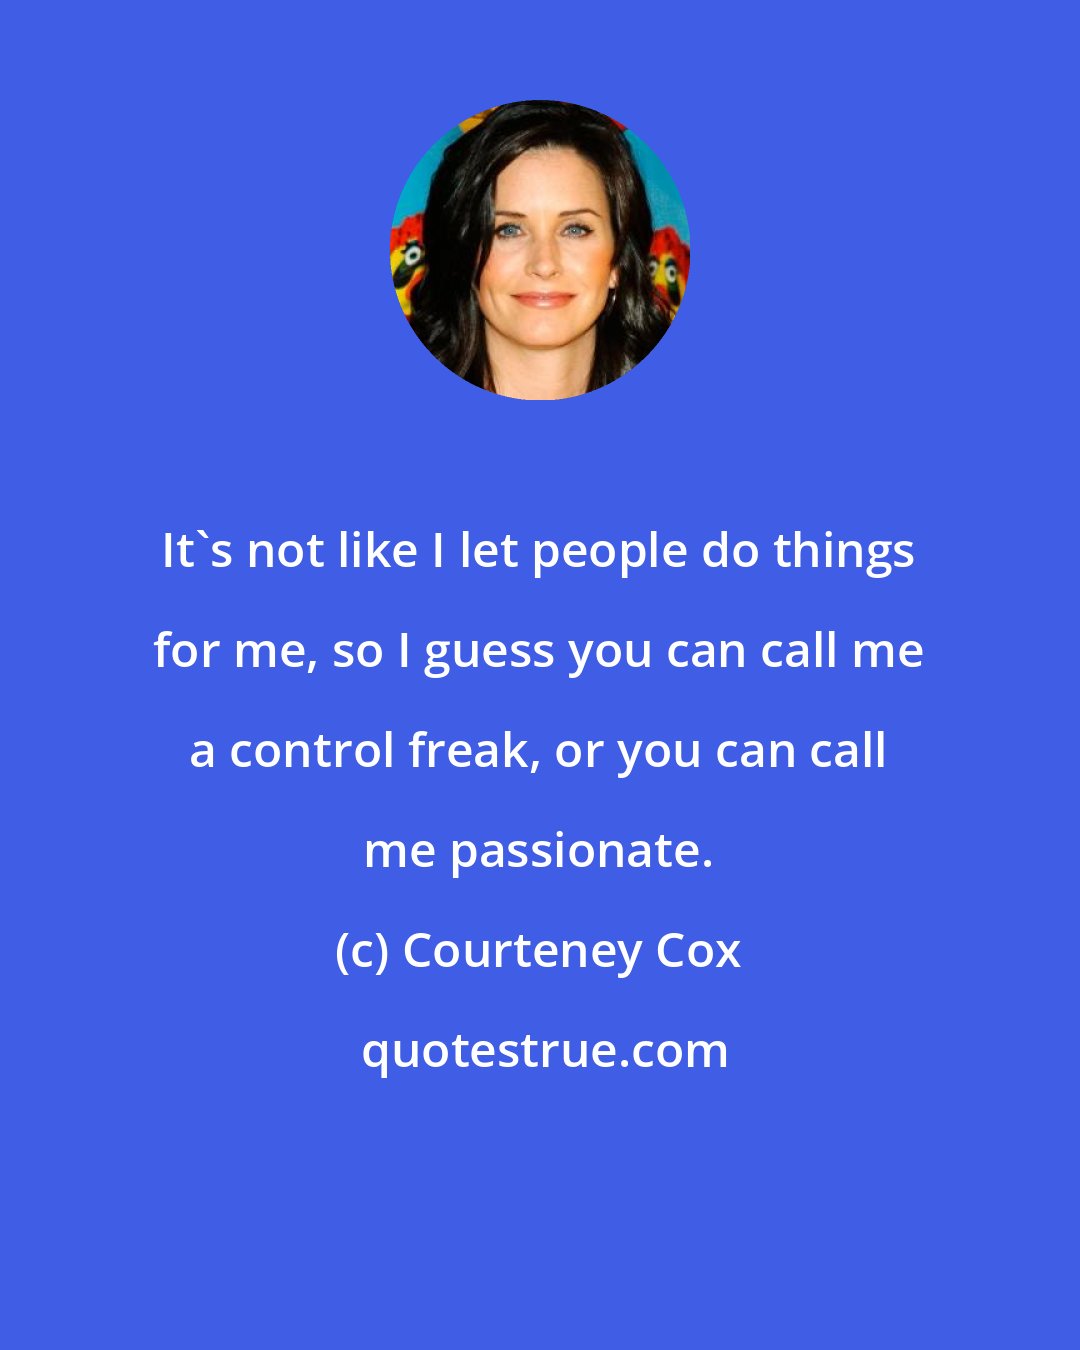 Courteney Cox: It's not like I let people do things for me, so I guess you can call me a control freak, or you can call me passionate.